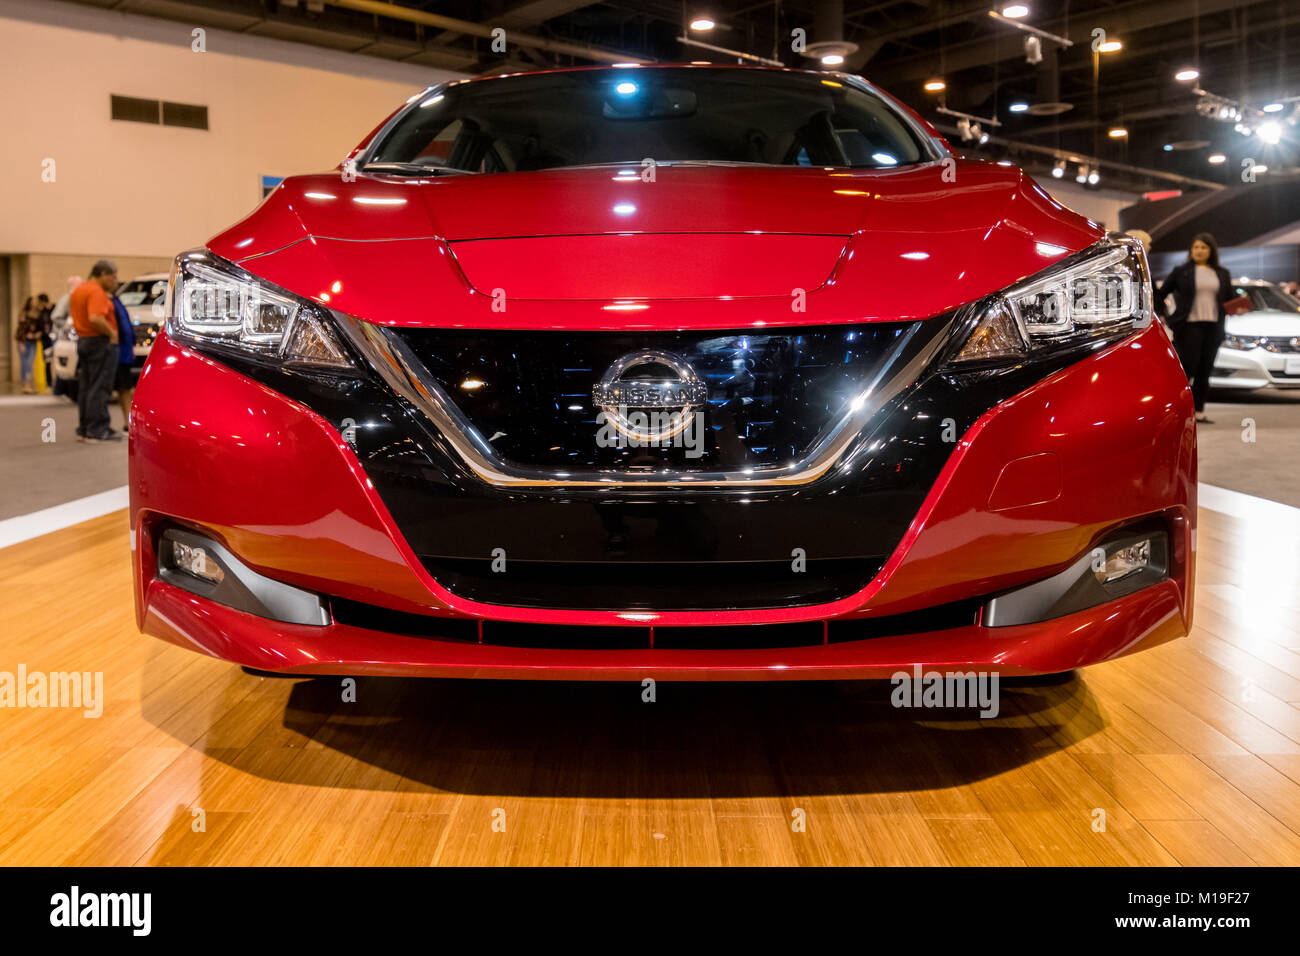 HOUSTON, TX - JANUARY 28, 2018: All New 2018 Nissan LEAF EV electric car shown at Houston Auto Show. Second Generation EV New Styling and Longer Range Stock Photo